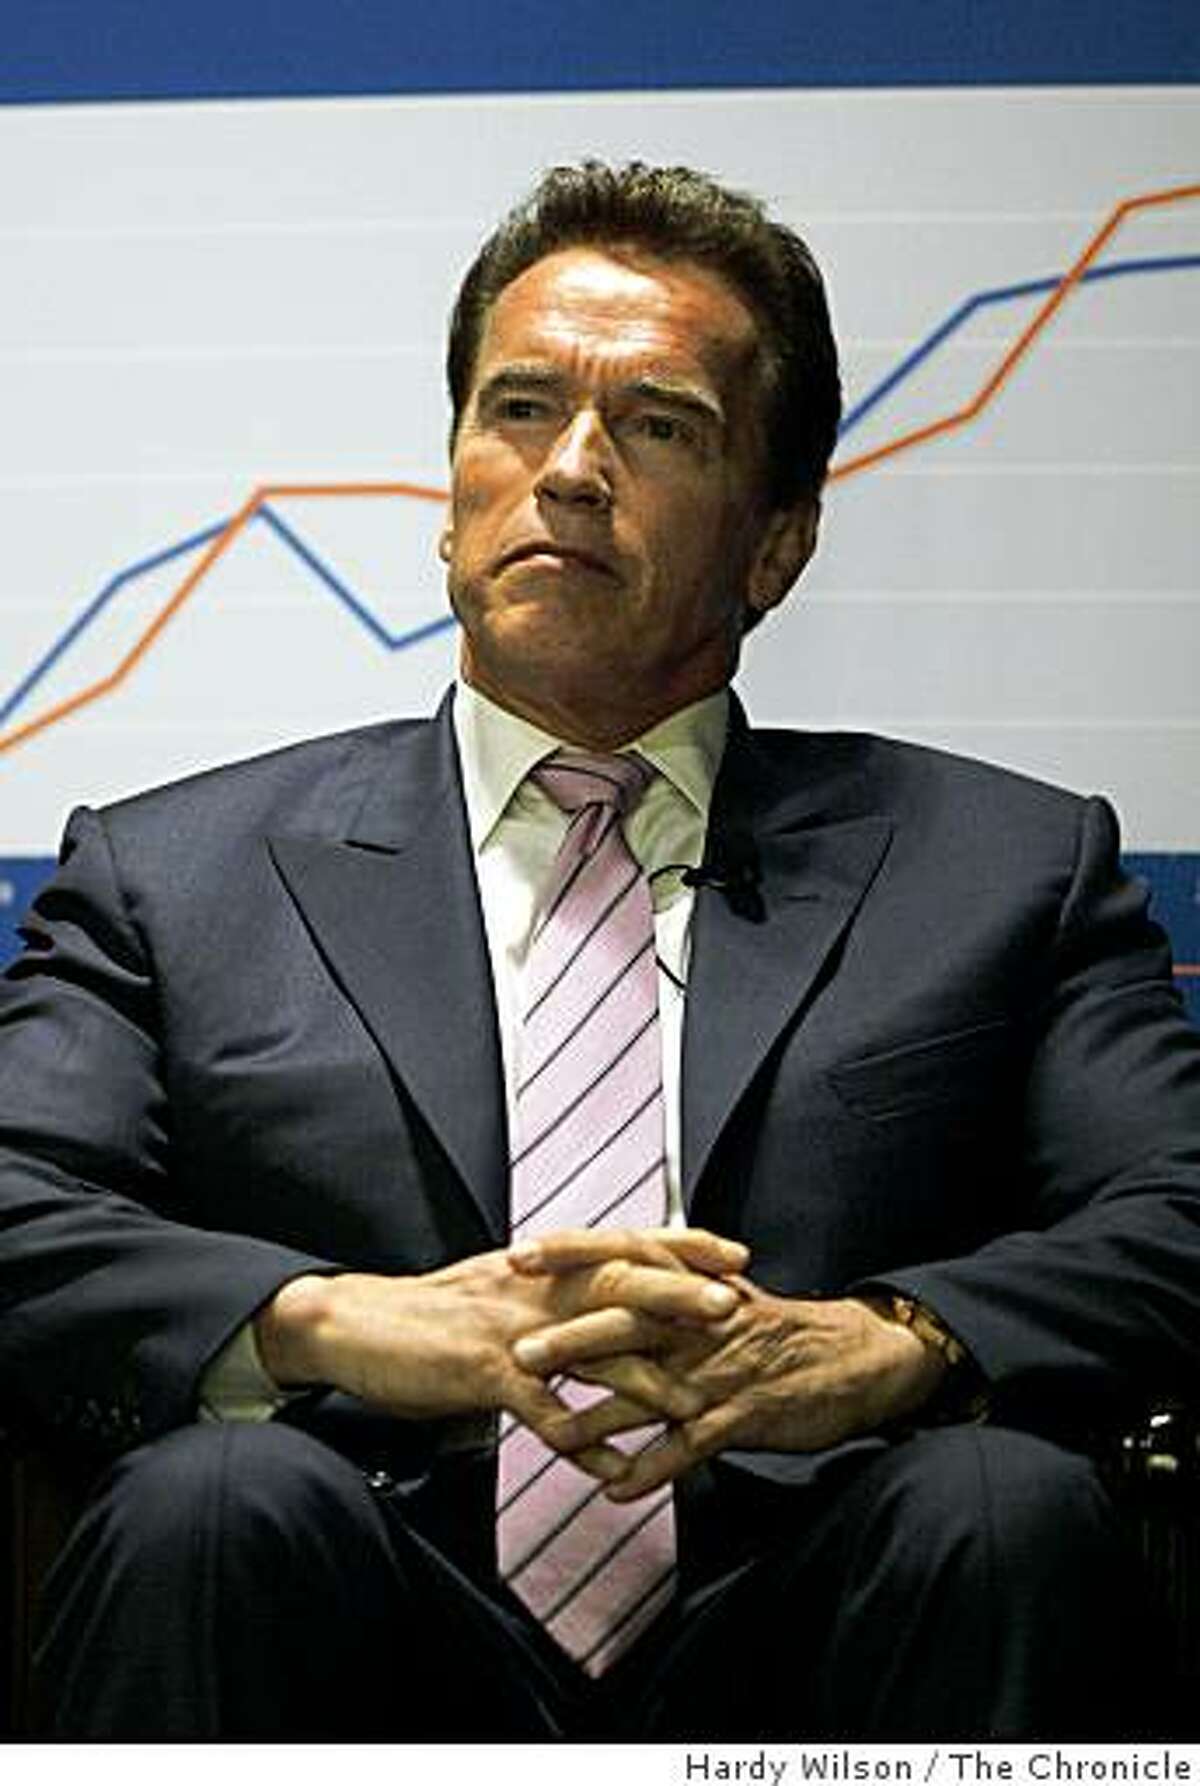 California Governor Arnold Schwarzenegger speaks to a crowd of reporters and the public during a special meeting of the Commonwealth Club at the Mark Hopkins hotel on Thursday, March 12, 2009 in San Francisco, Calif.. Schwarzenegger was making a pitch for the passage a series of measures on the May 19 special election ballot that were part of the budget compromise approved by the legislature last month.